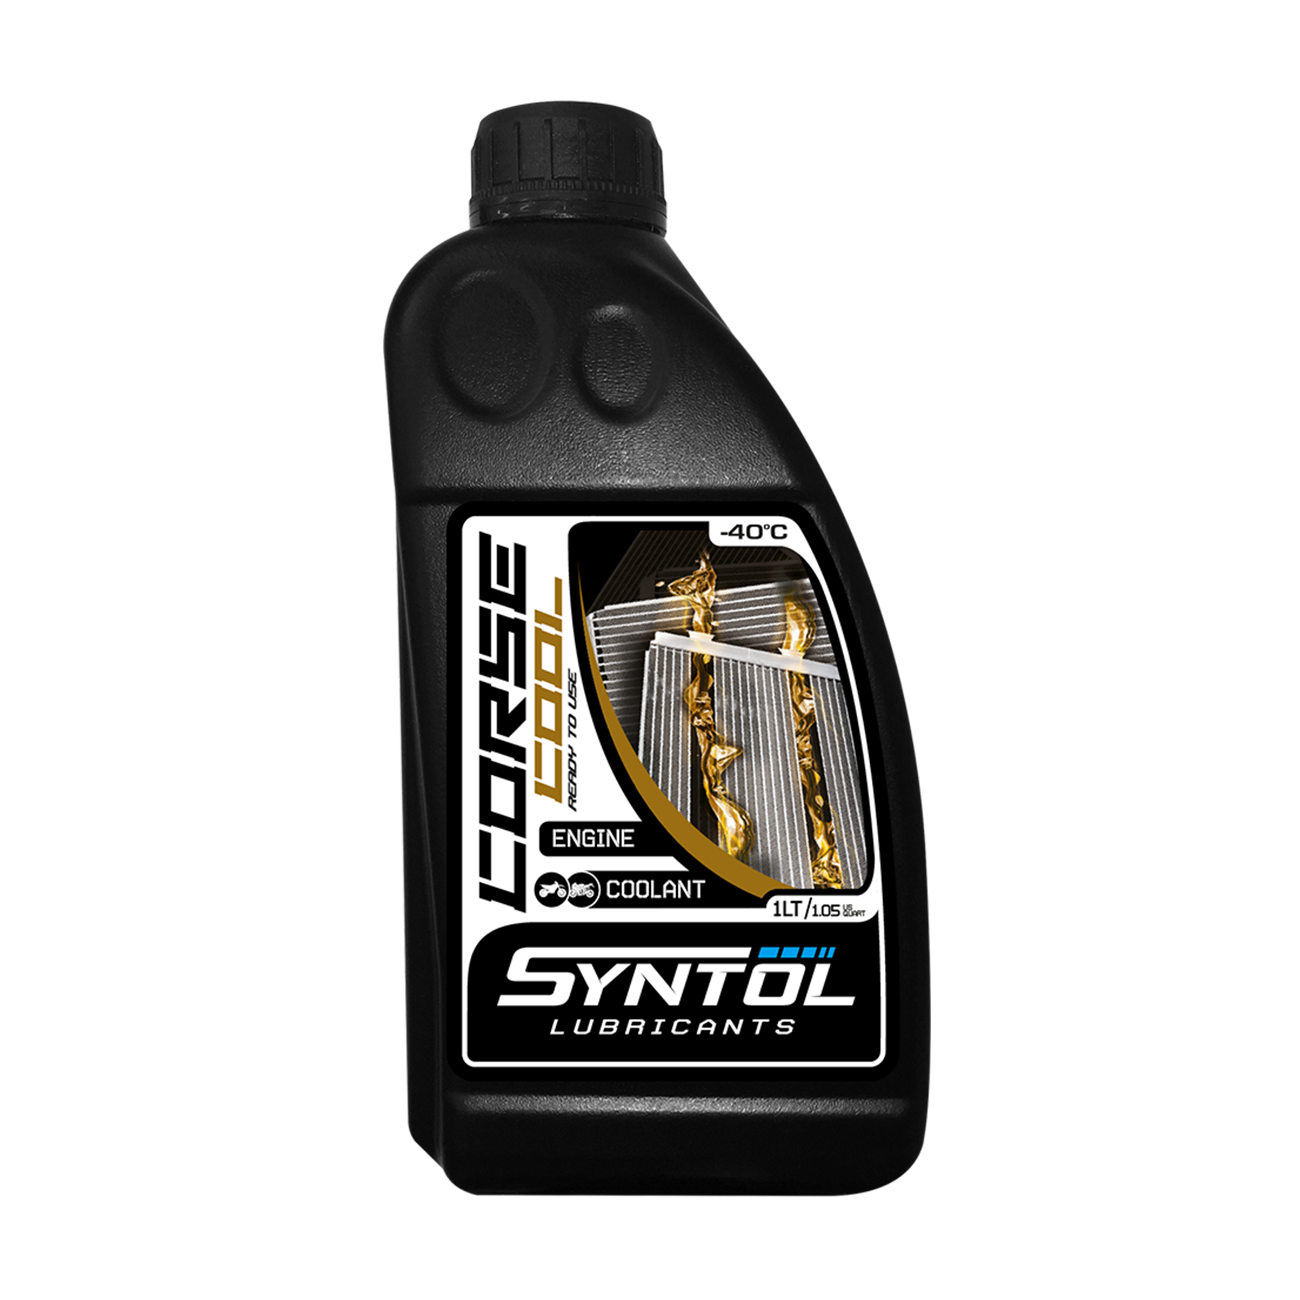 Syntol Corse Motorcycle Engine Coolant - 1 Litre-F0051-1-Oils and Lubricants-Pyramid Motorcycle Accessories